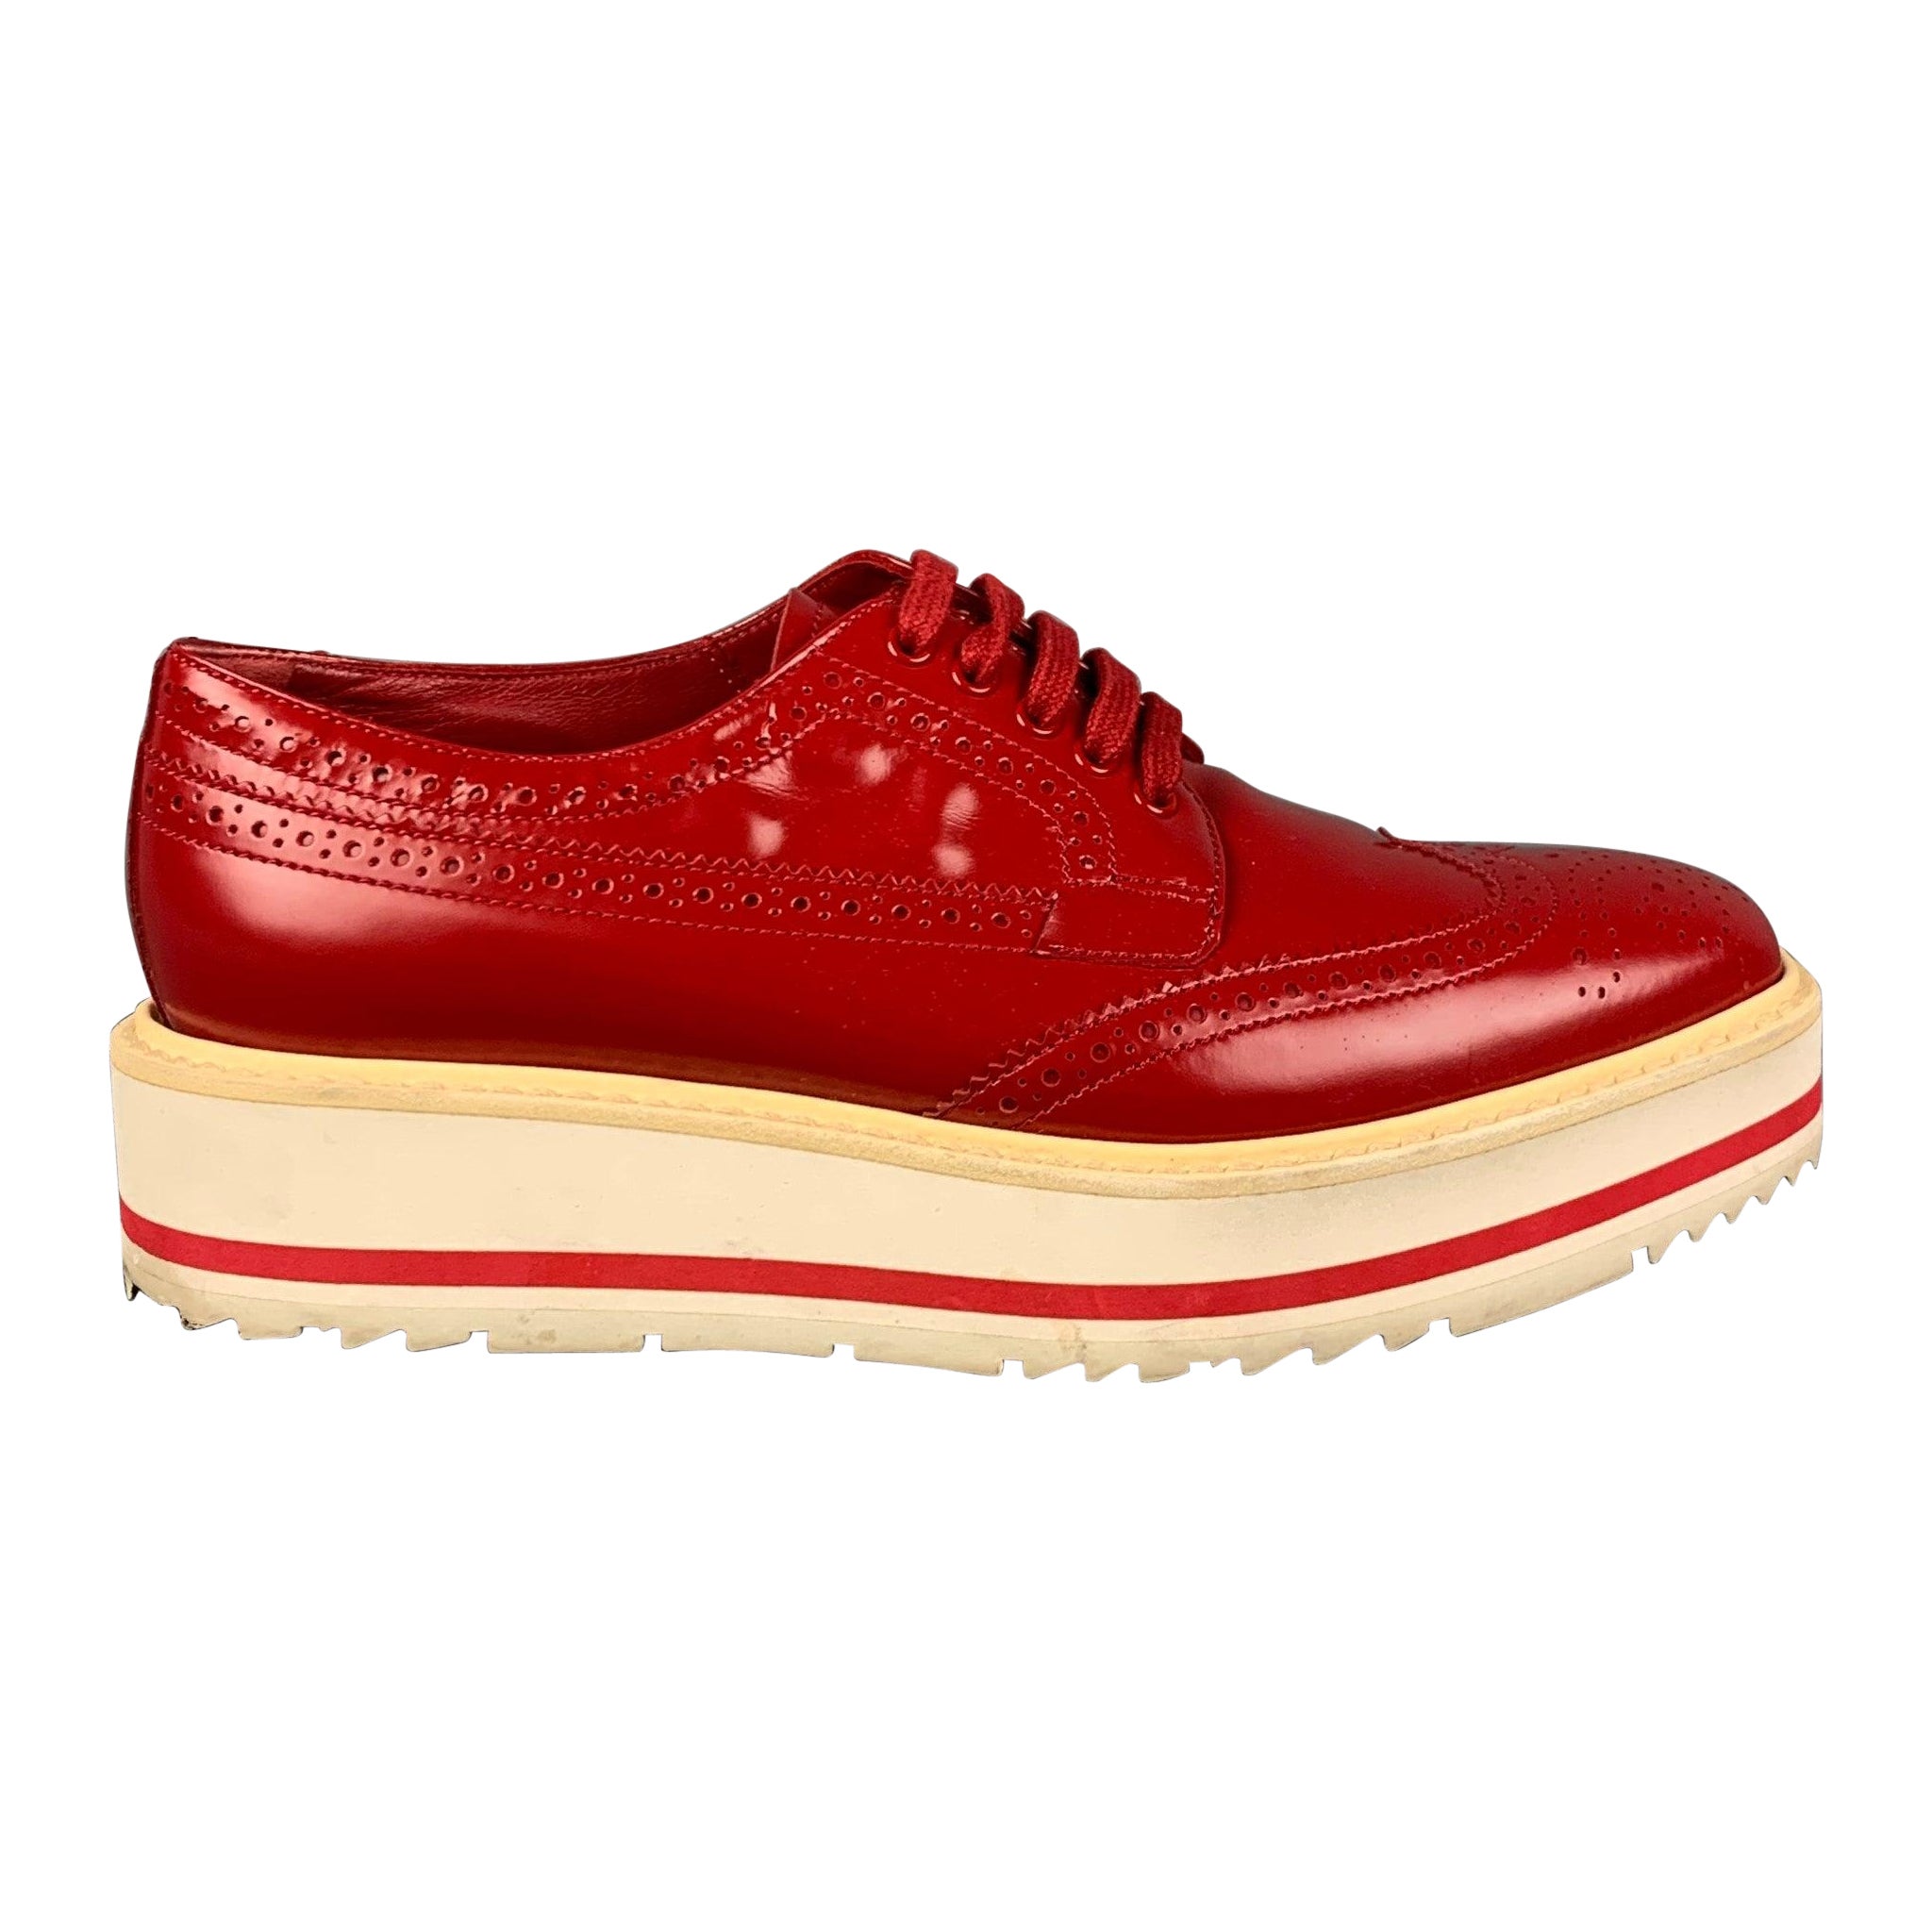 PRADA Size 6 Red White Leather Perforated Wingtip Shoes For Sale